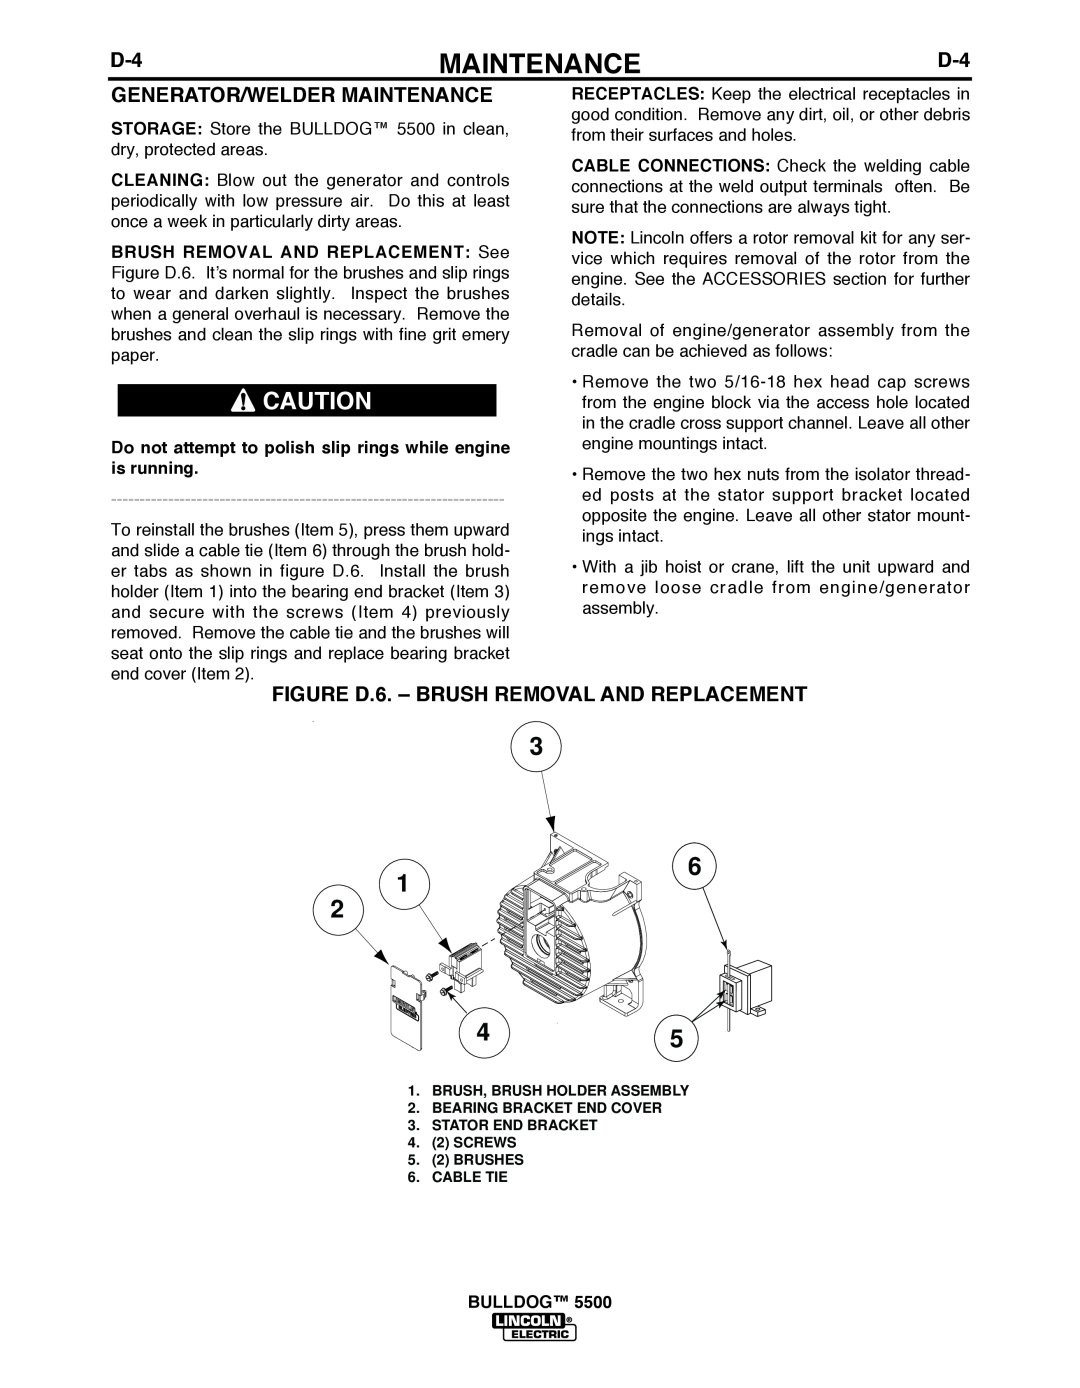 Lincoln Electric IM10074 manual Generator/Welder Maintenance, FIGURE D.6. - bRUSH REMOVAL AND REPLACEMENT, bULLDOG 